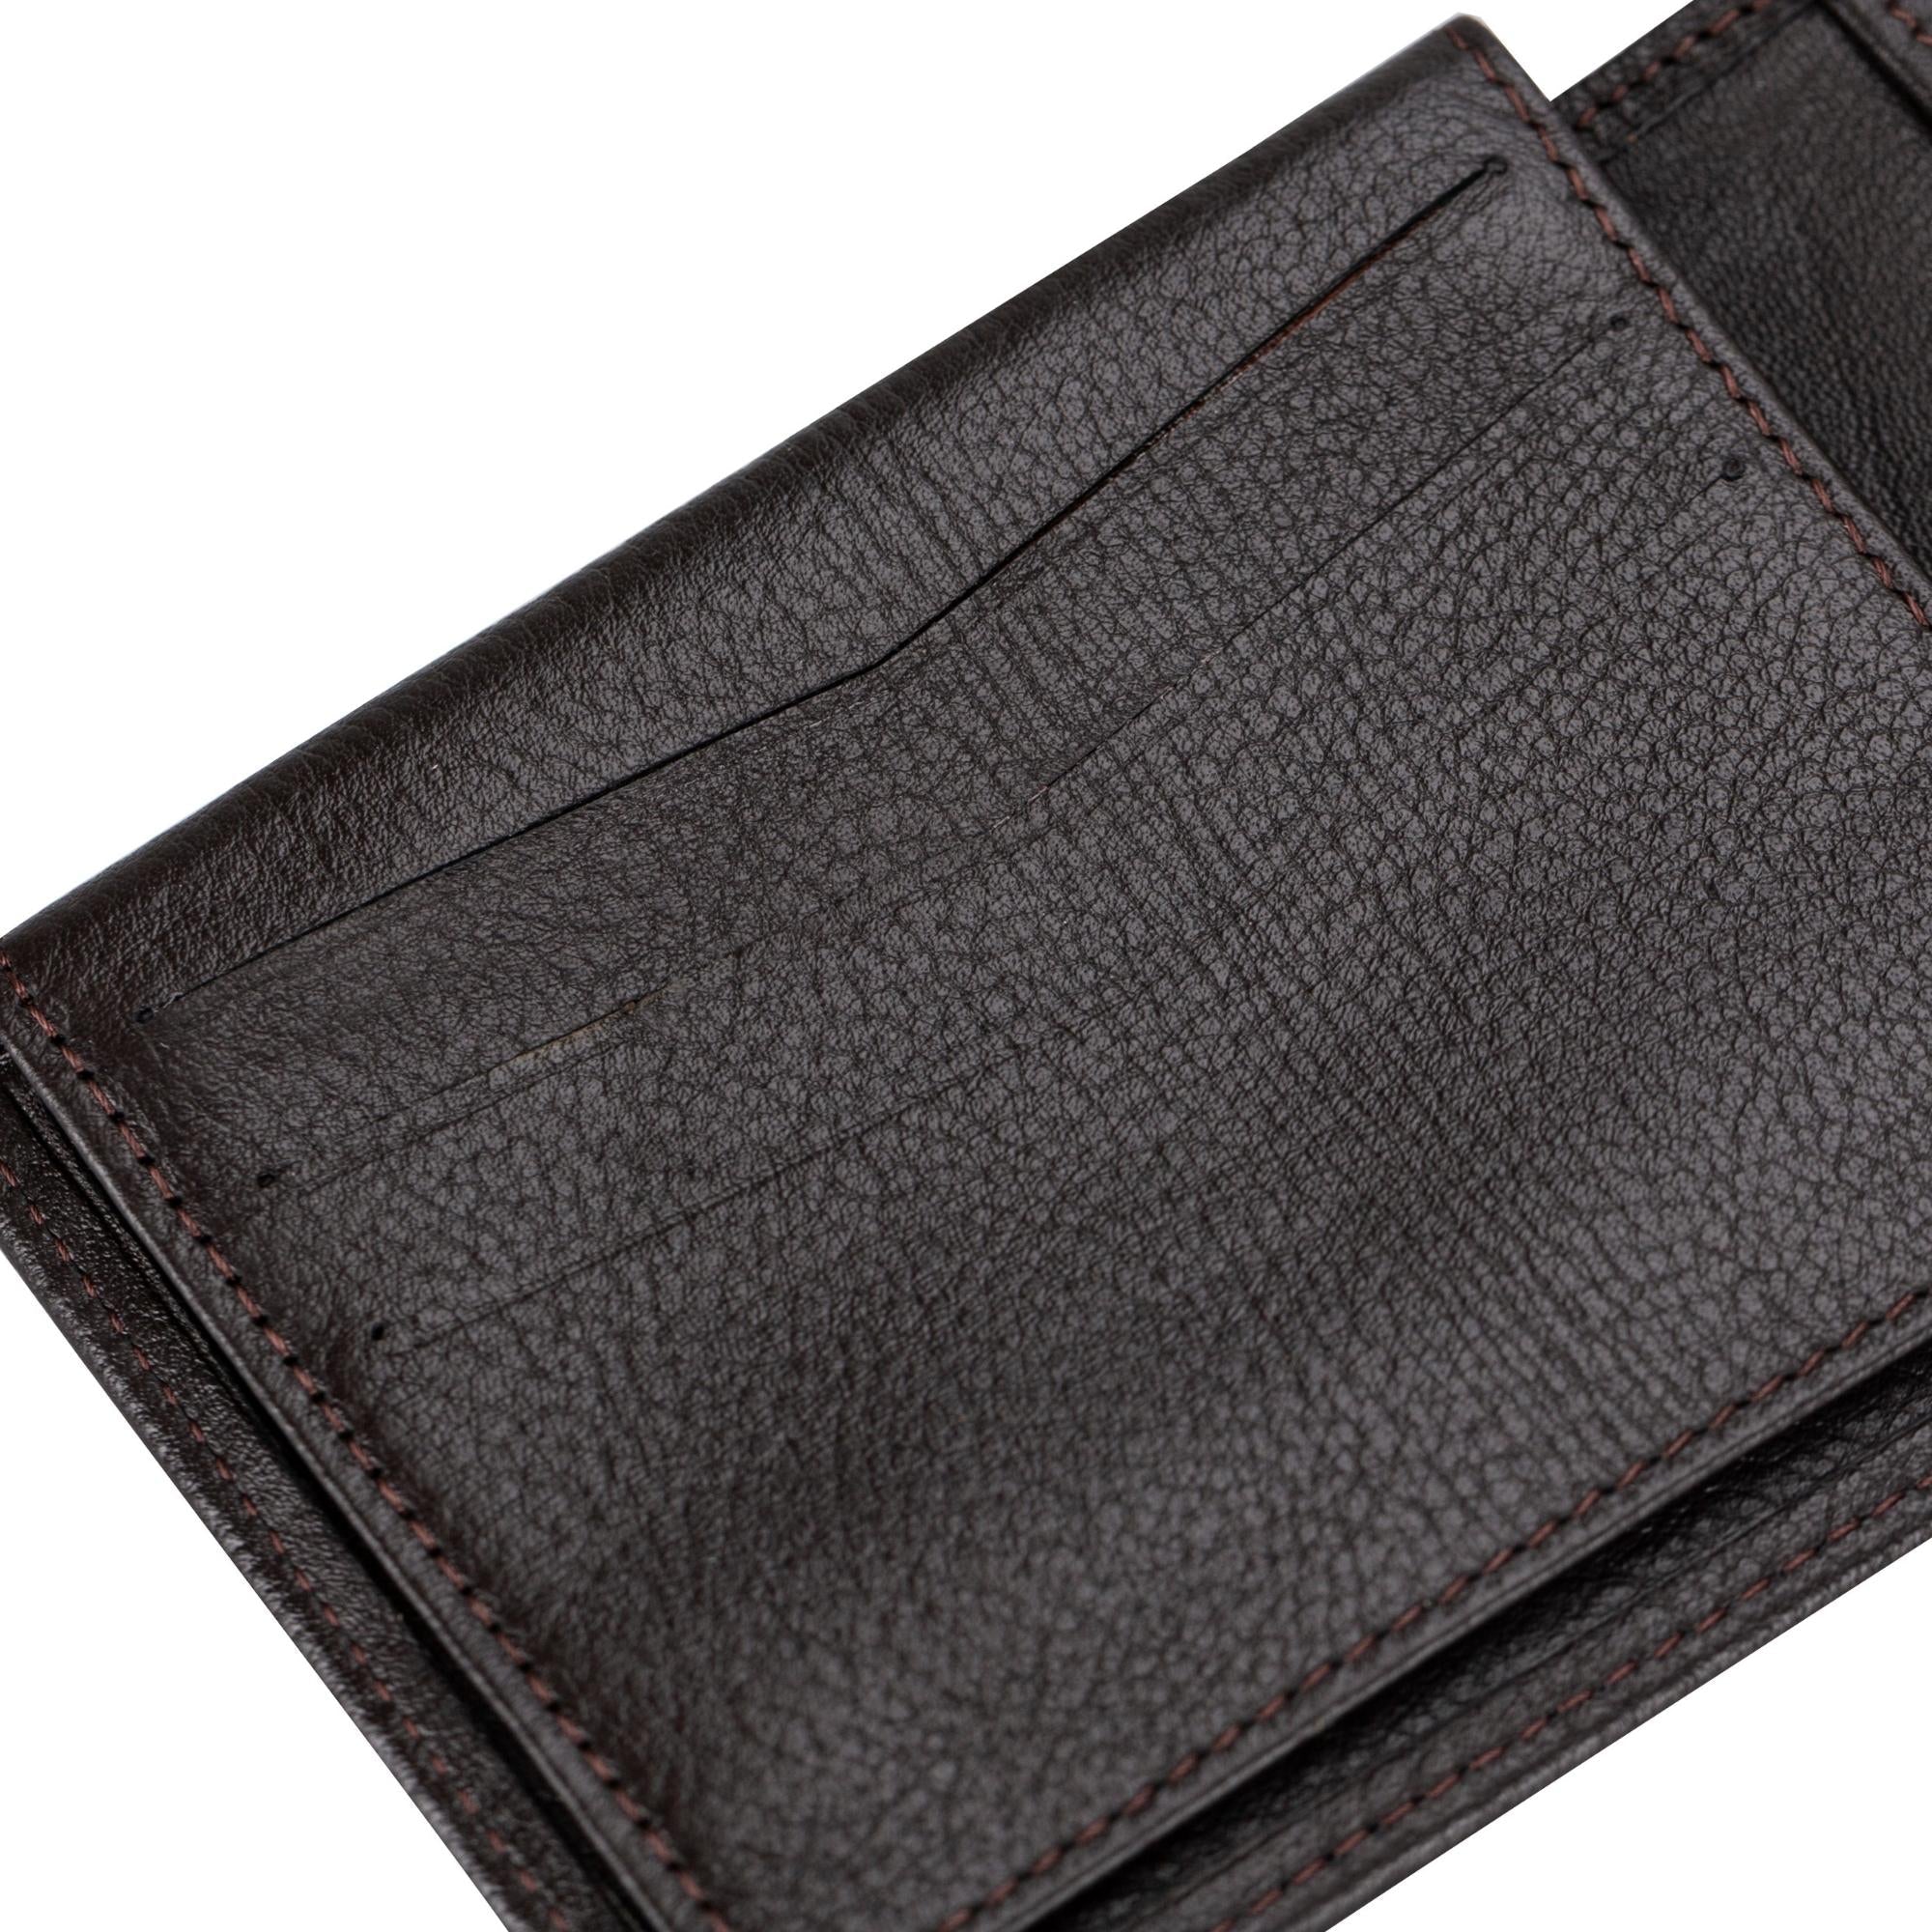 Classic Bifold Leather Wallet (Premium, Full Grain Leather), Chocolate Brown